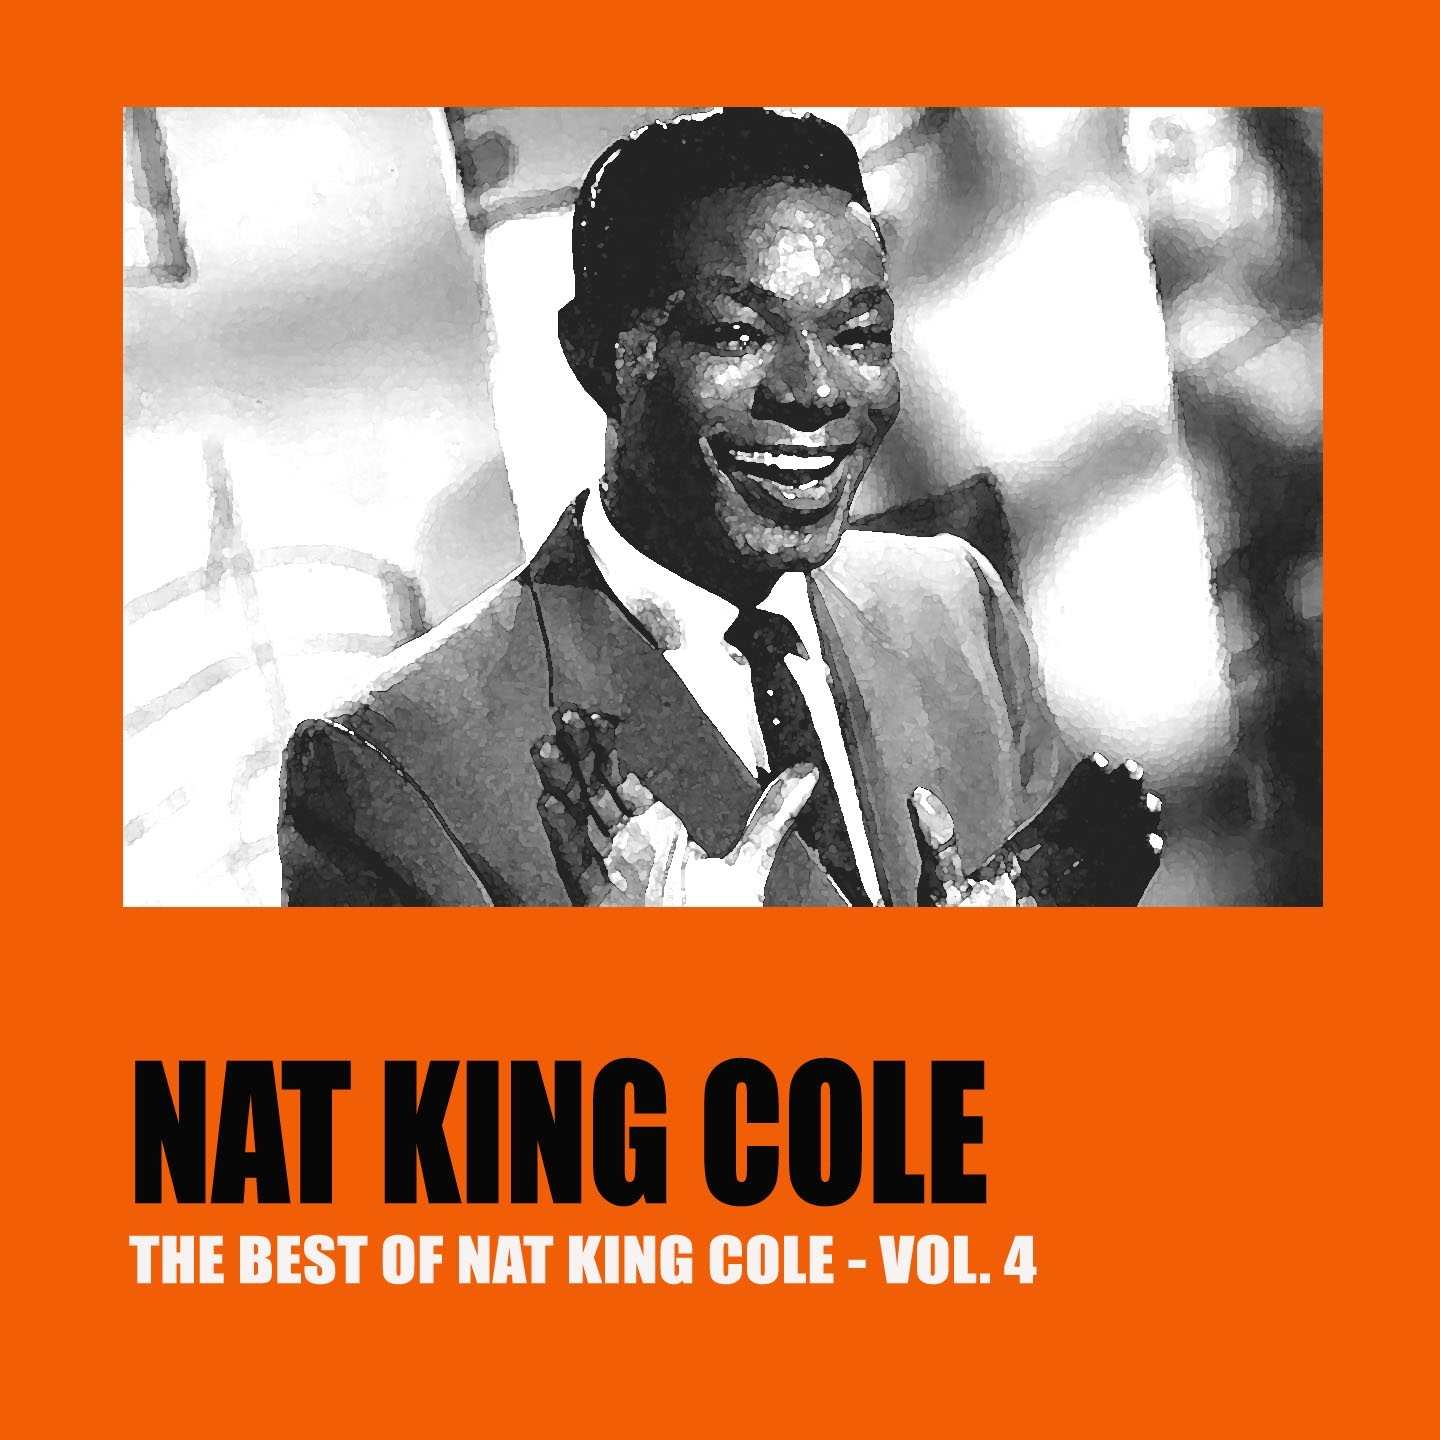 The Best of Nat King Cole, Vol. 4